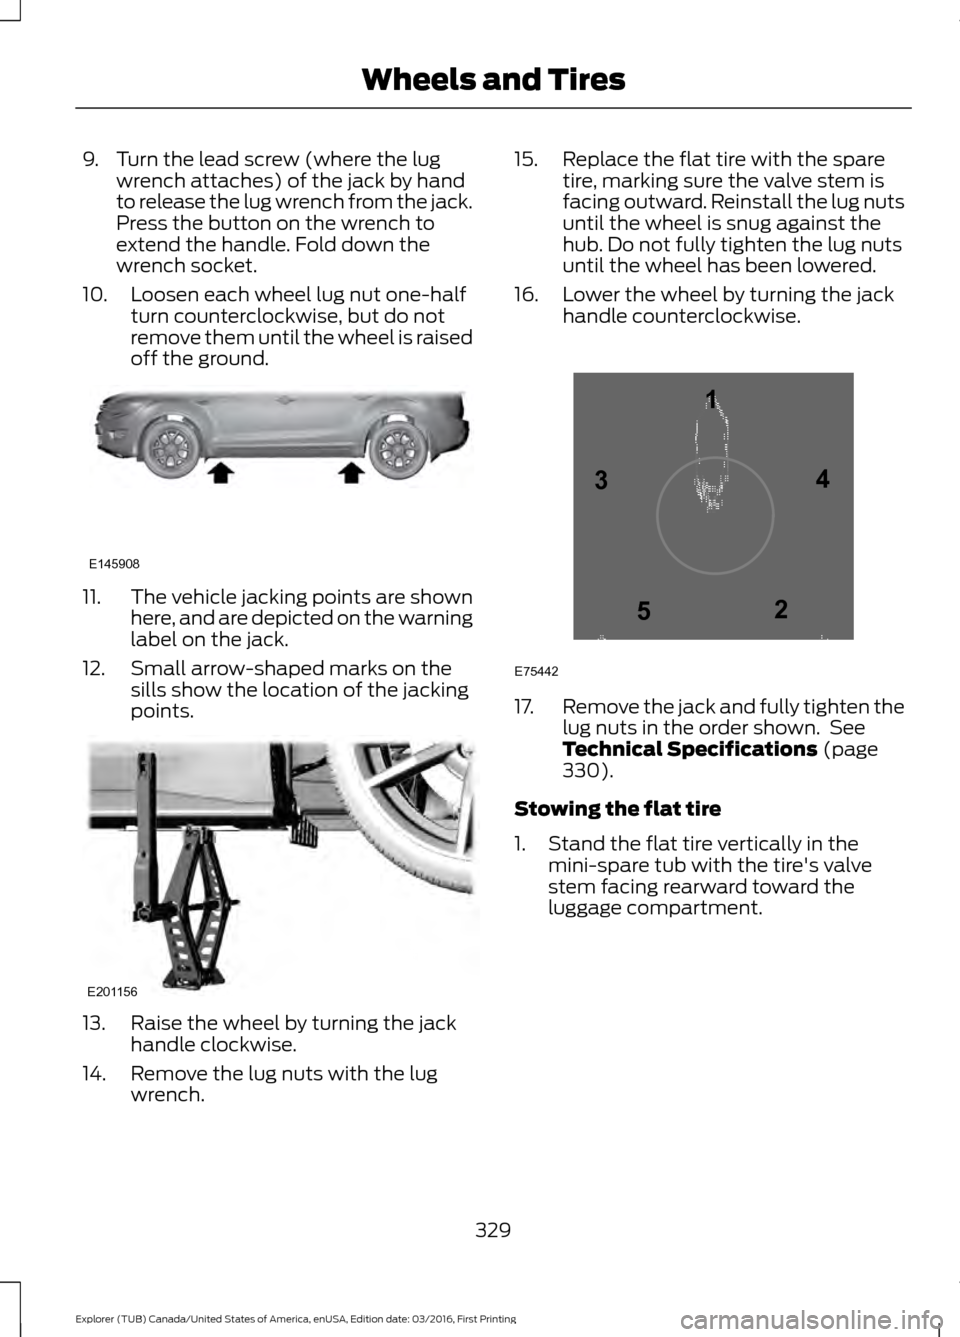 FORD EXPLORER 2017 5.G Owners Manual 9. Turn the lead screw (where the lug
wrench attaches) of the jack by hand
to release the lug wrench from the jack.
Press the button on the wrench to
extend the handle. Fold down the
wrench socket.
10